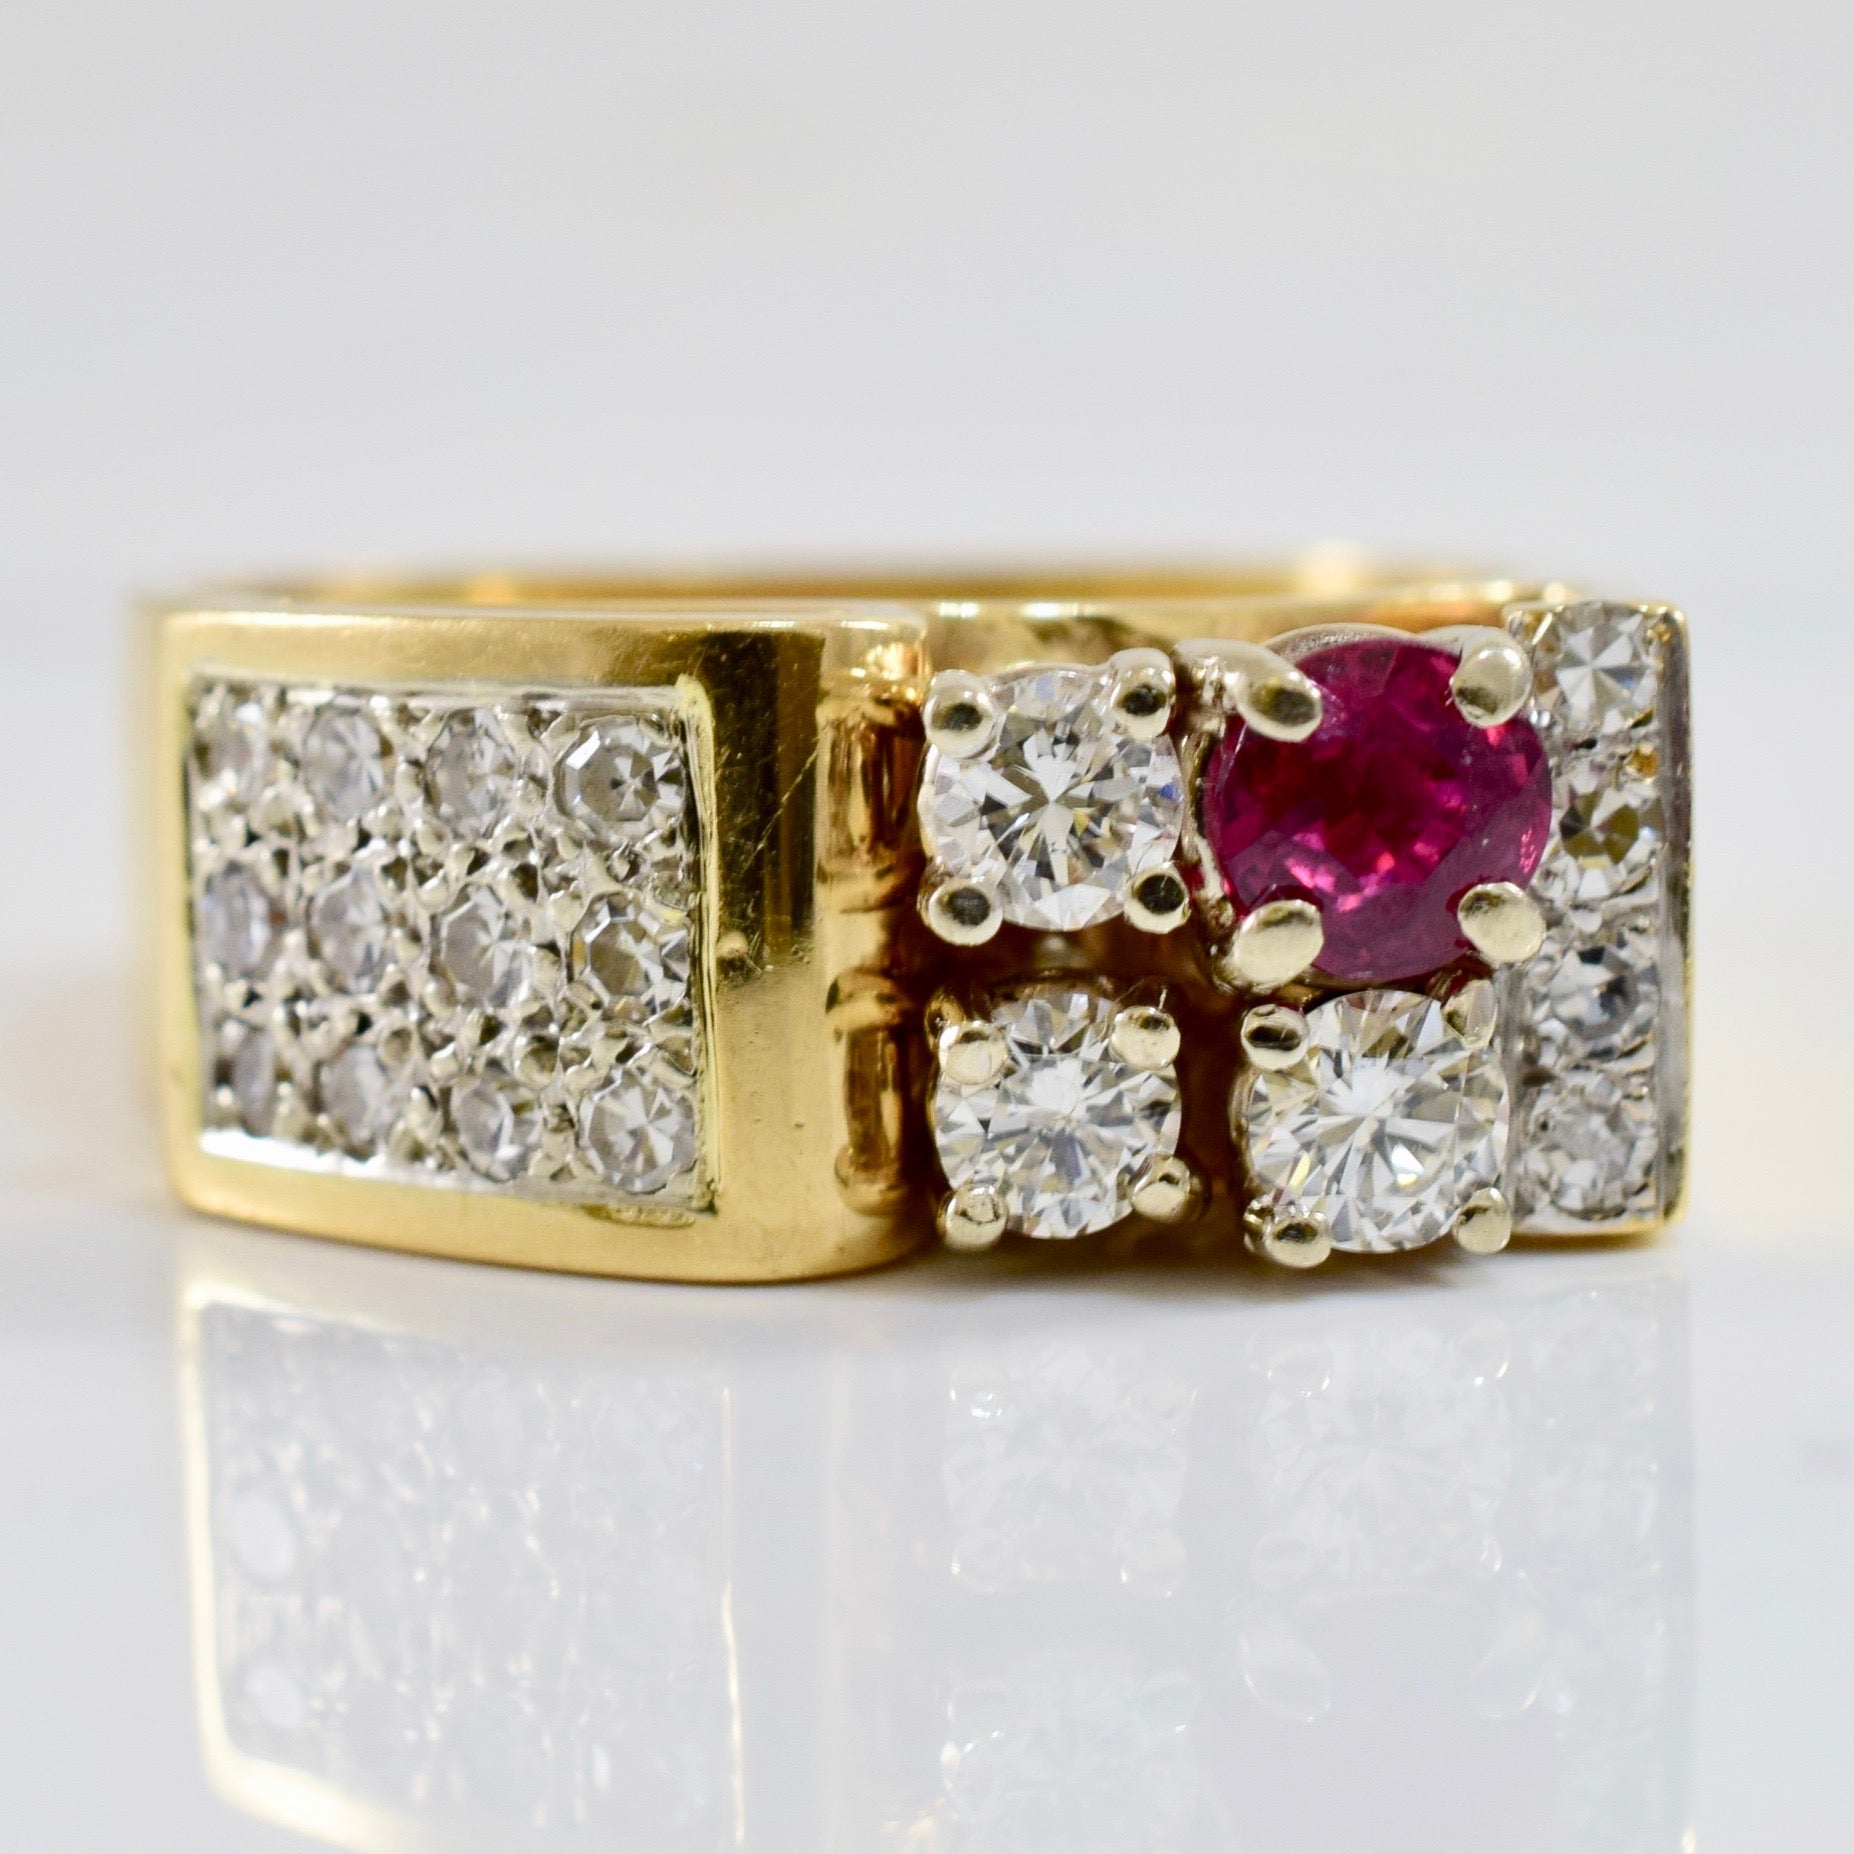 High Set Diamond Cluster and Ruby Ring | 1.0 ctw SZ 8.25 |